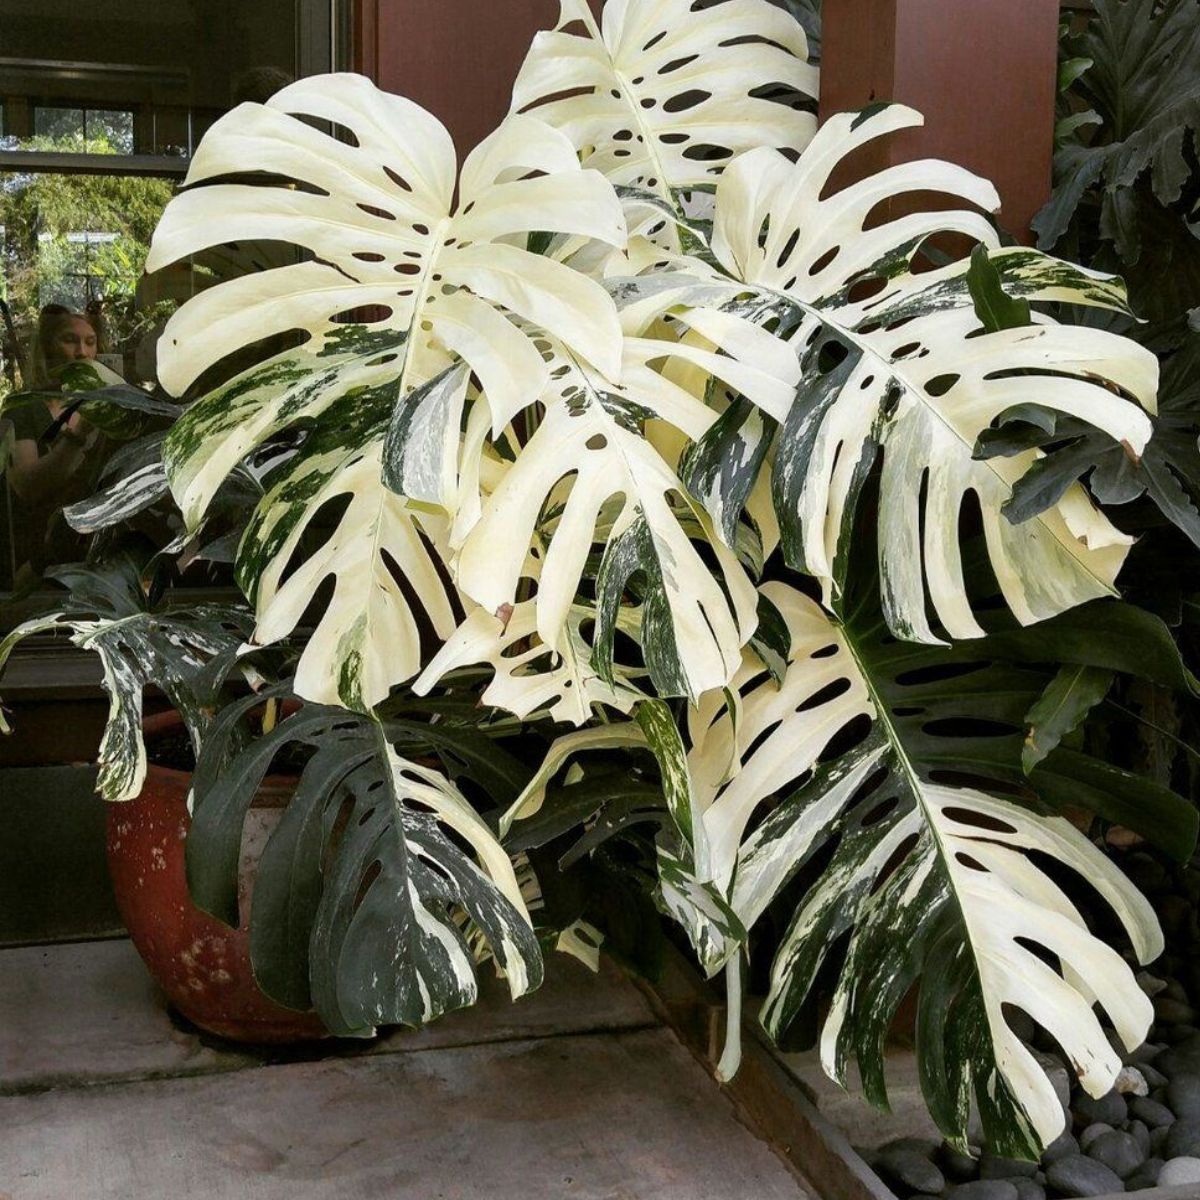 Facebook Groups for Florists Monstera variegated - Expensive Houseplant